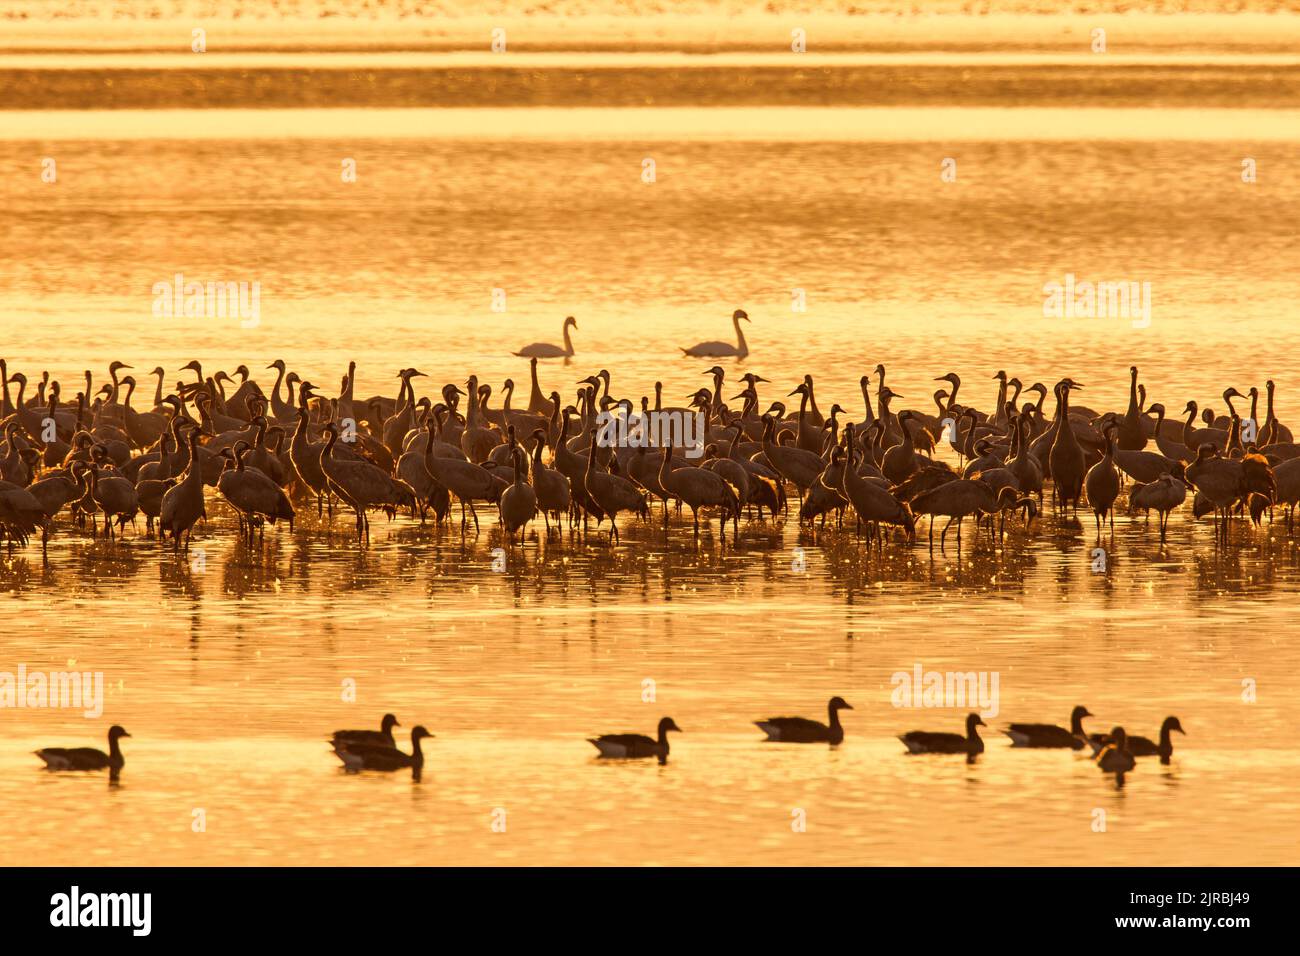 Flock of common cranes / Eurasian crane (Grus grus) group congregating at sunset in shallow water at roosting site in autumn / fall Stock Photo